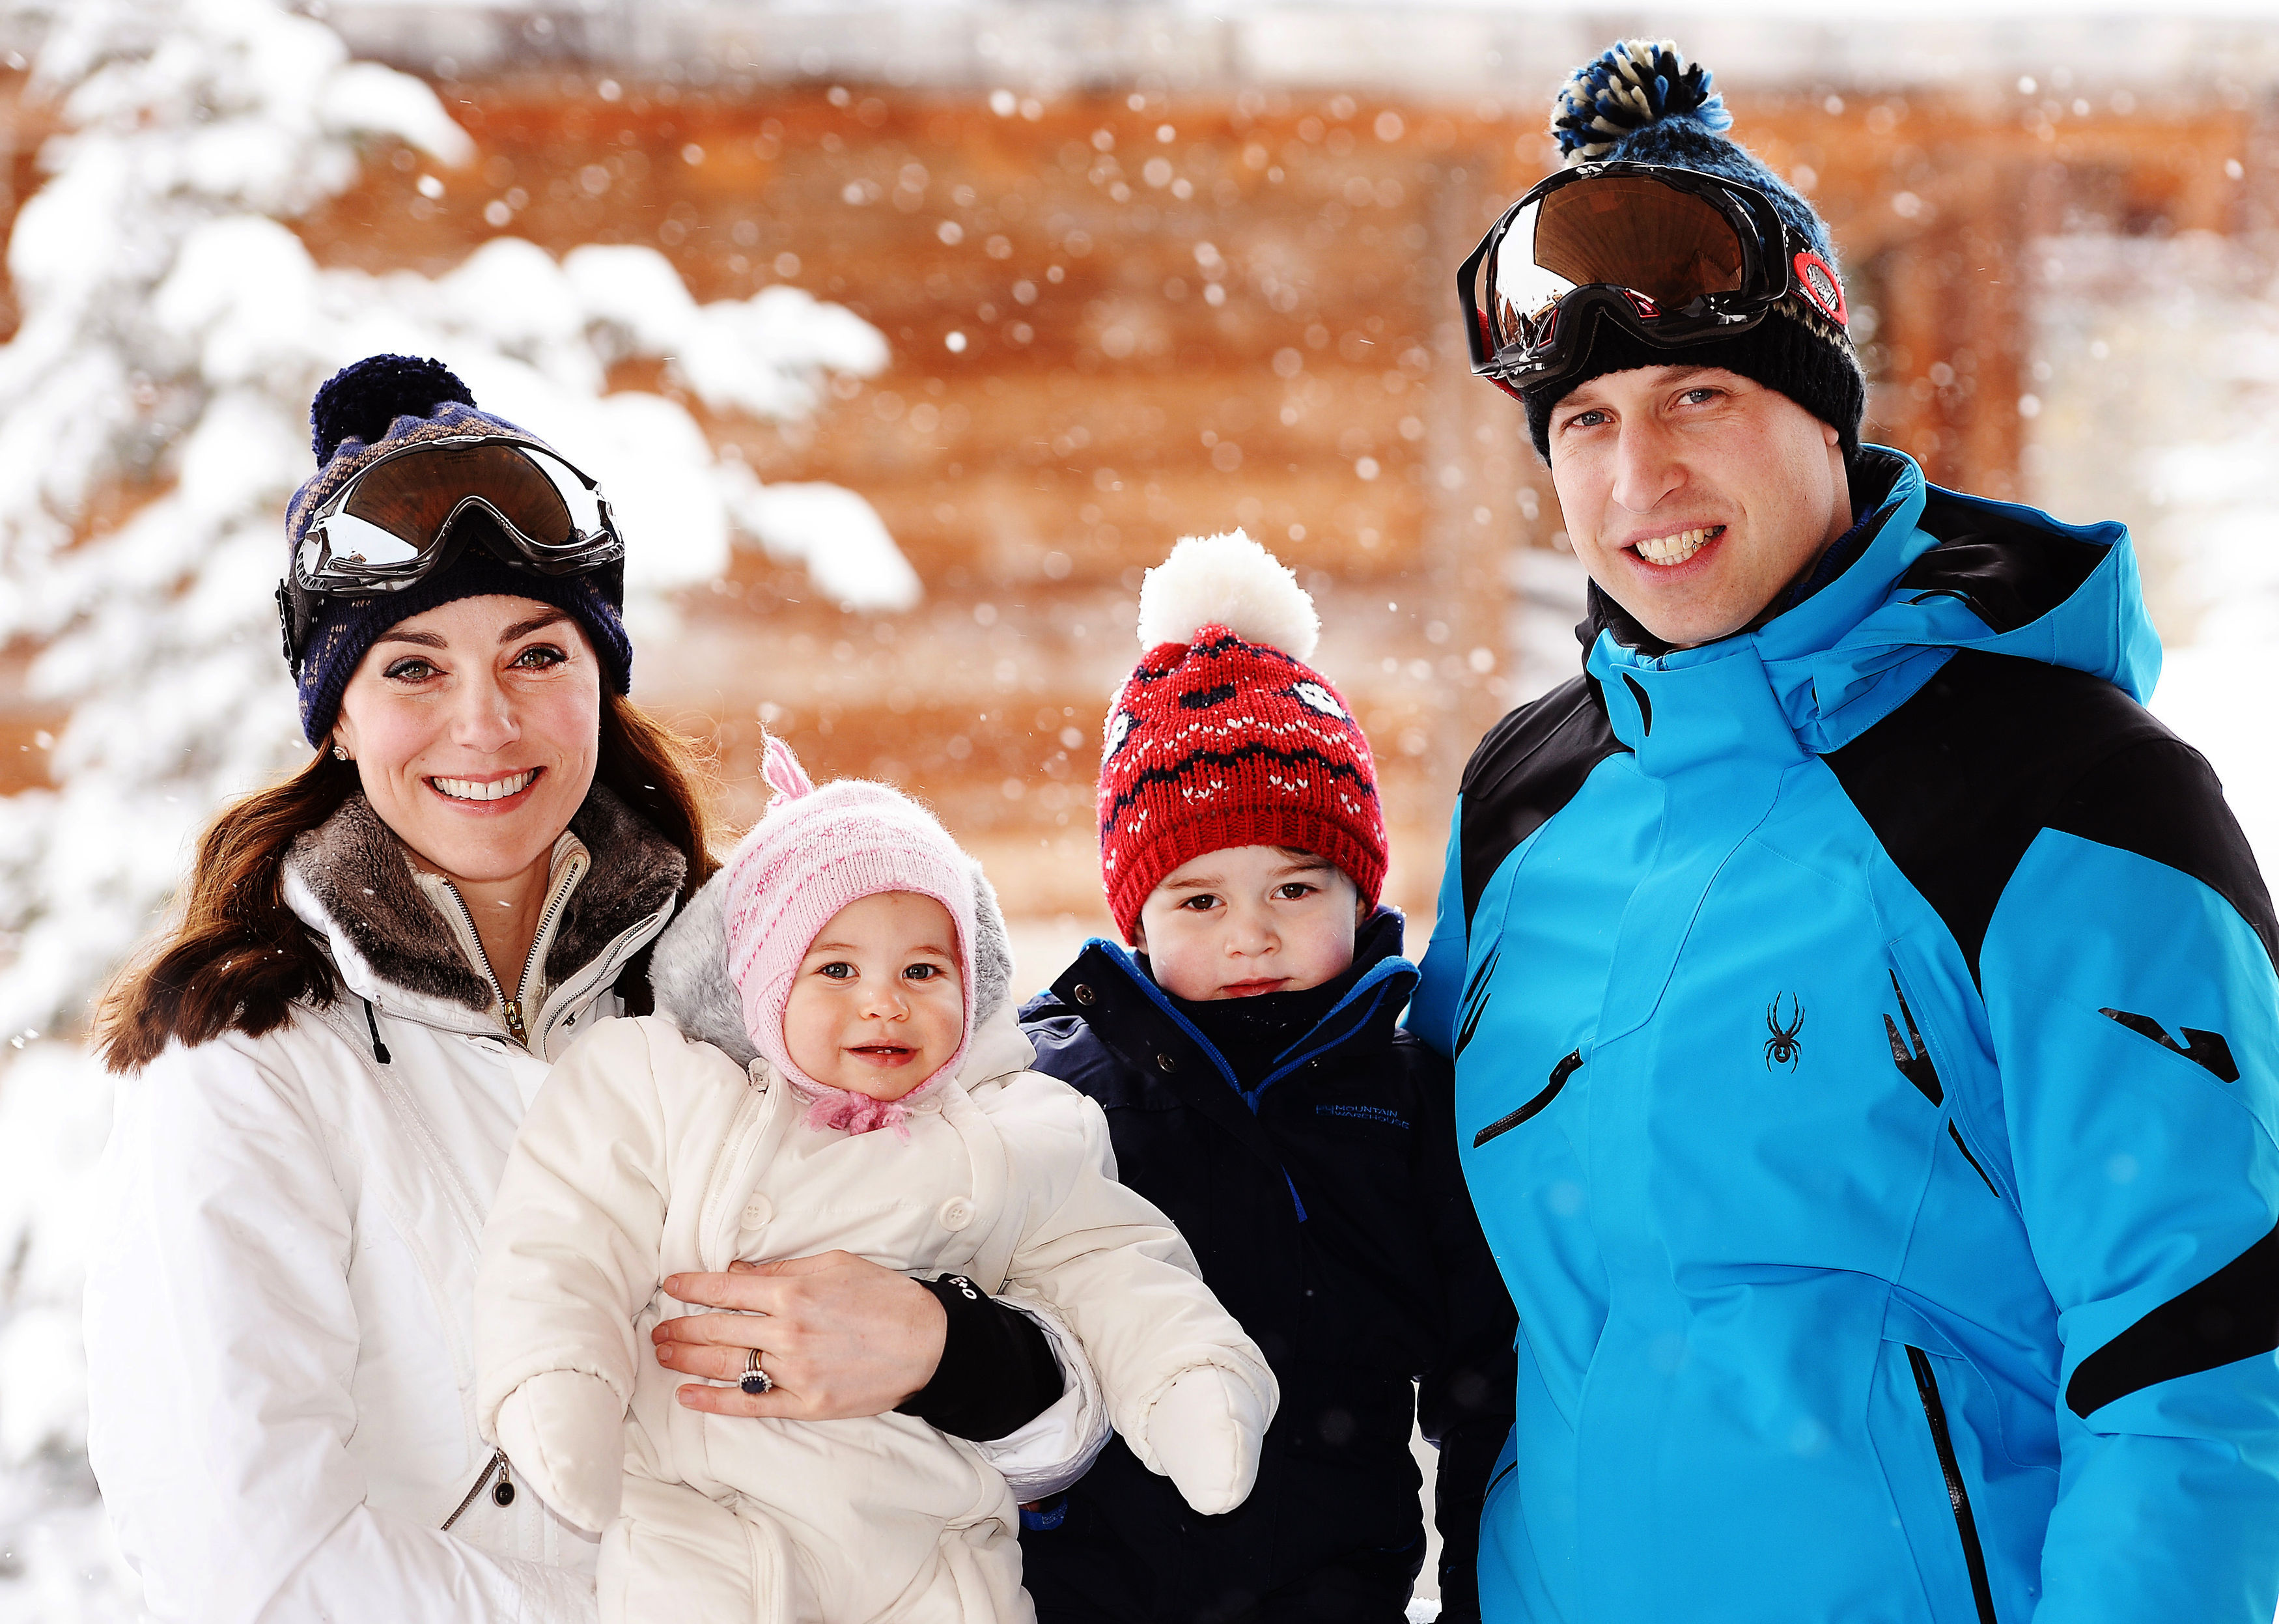 Catherine, Duchess of Cambridge and Prince William, Duke of Cambridge, pose with their children, Princess Charlotte and Prince George